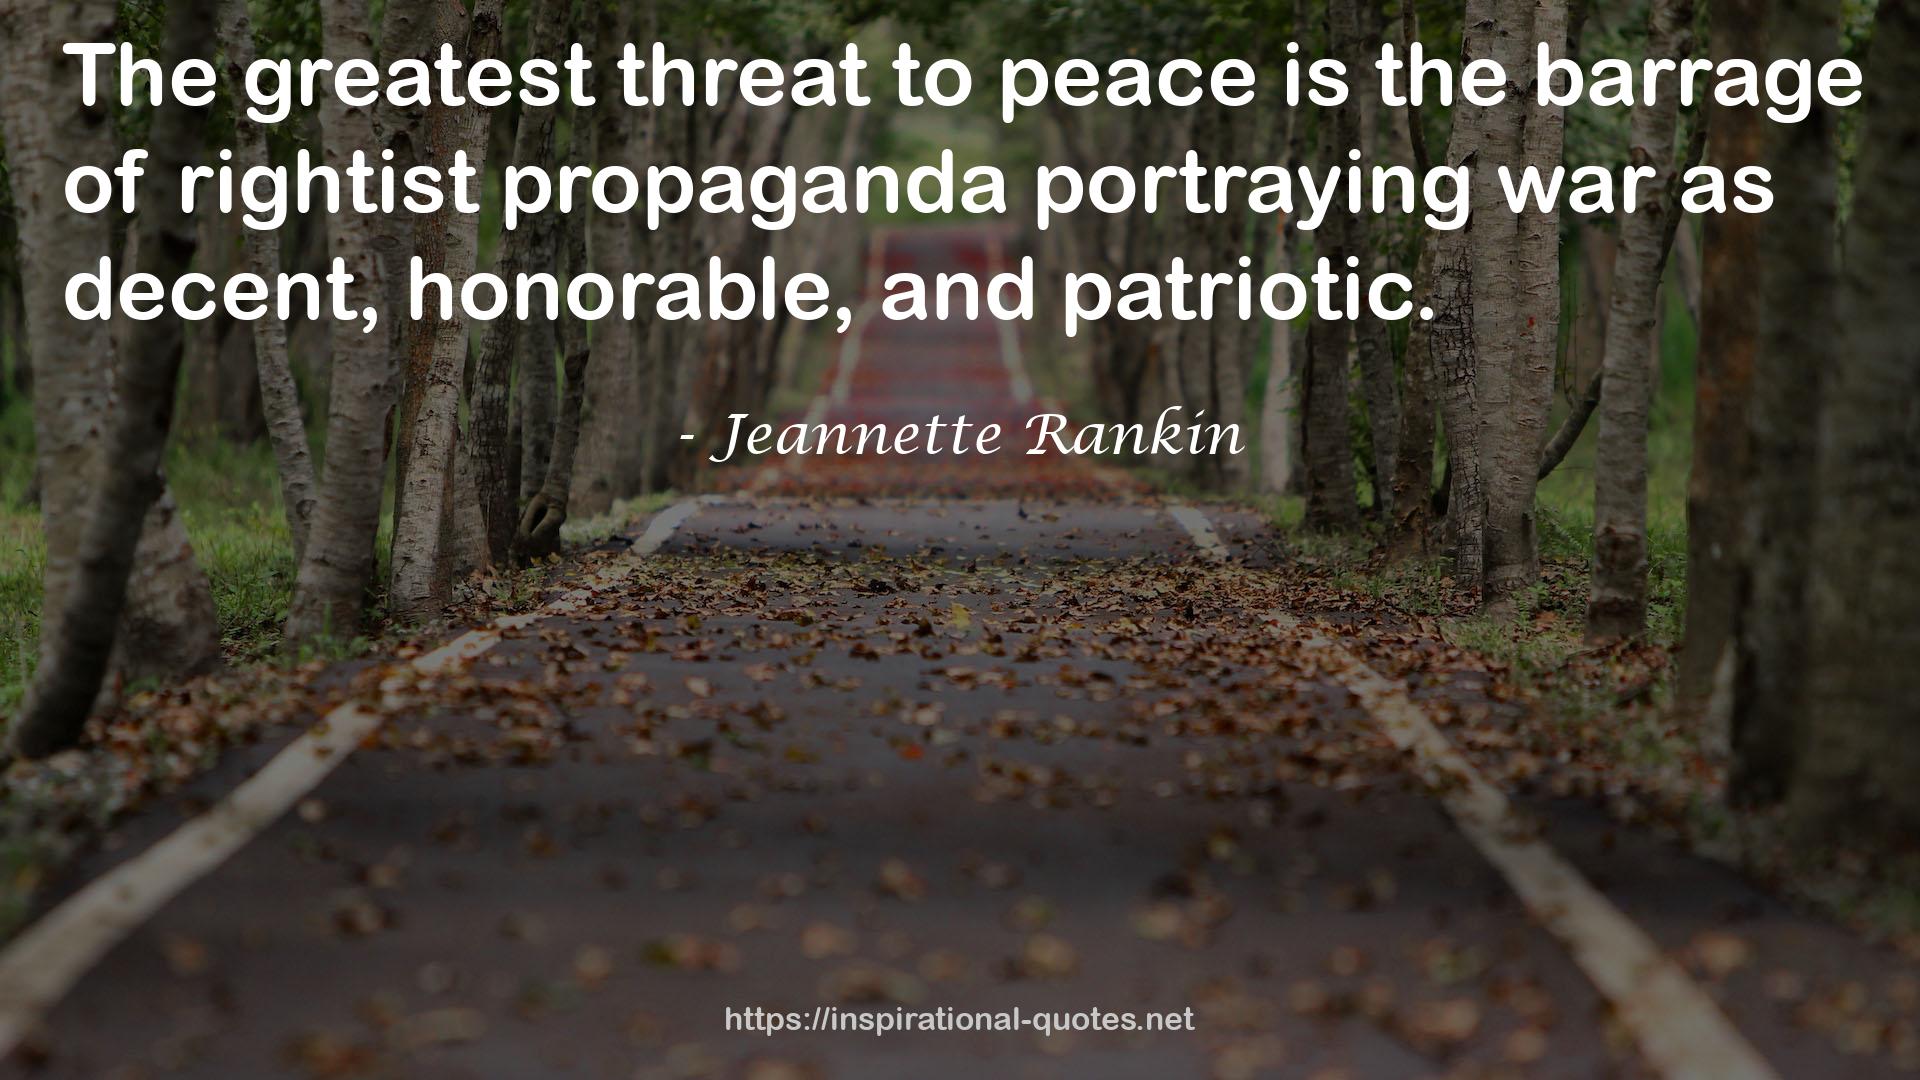 Jeannette Rankin QUOTES